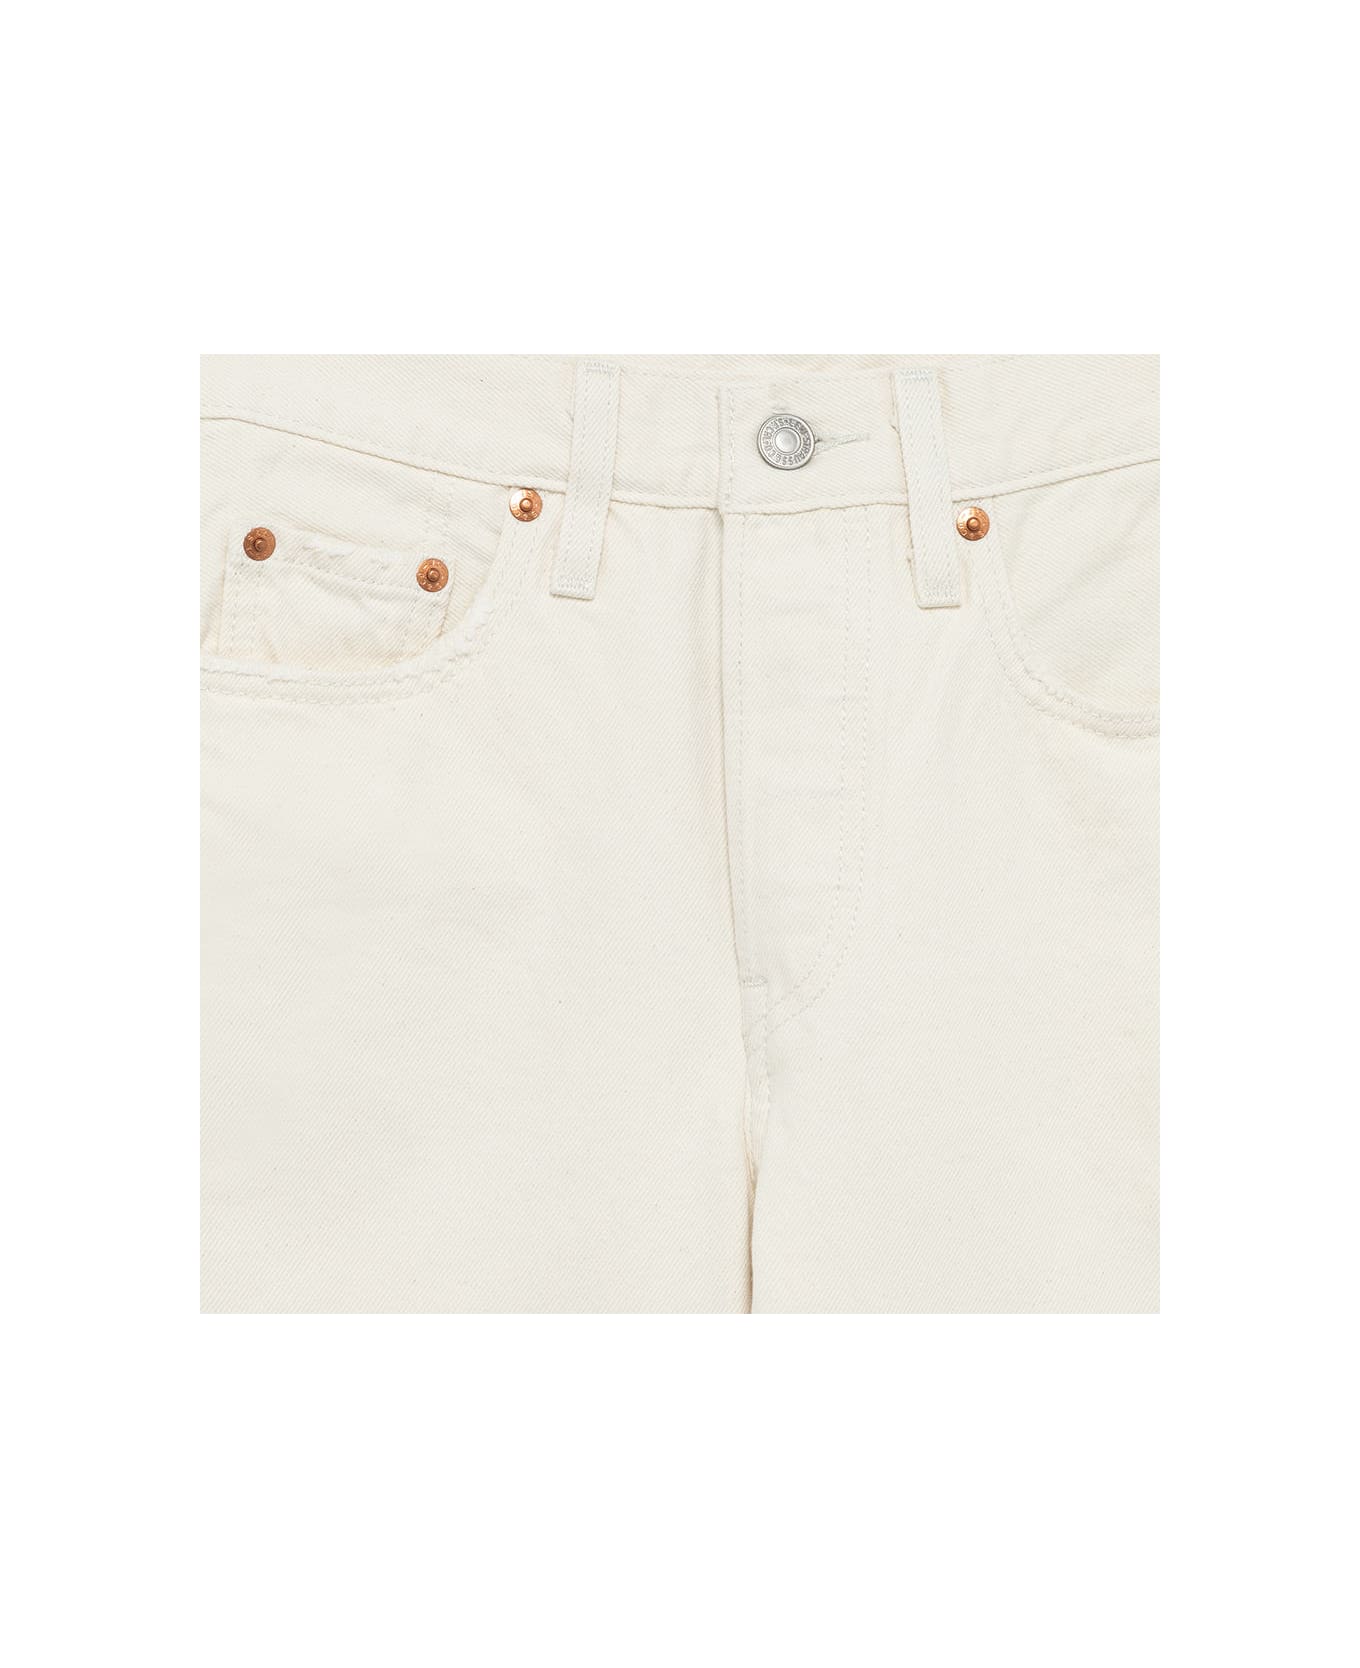 Levi's Levis 501 Cropped Jeans - Bianco ボトムス